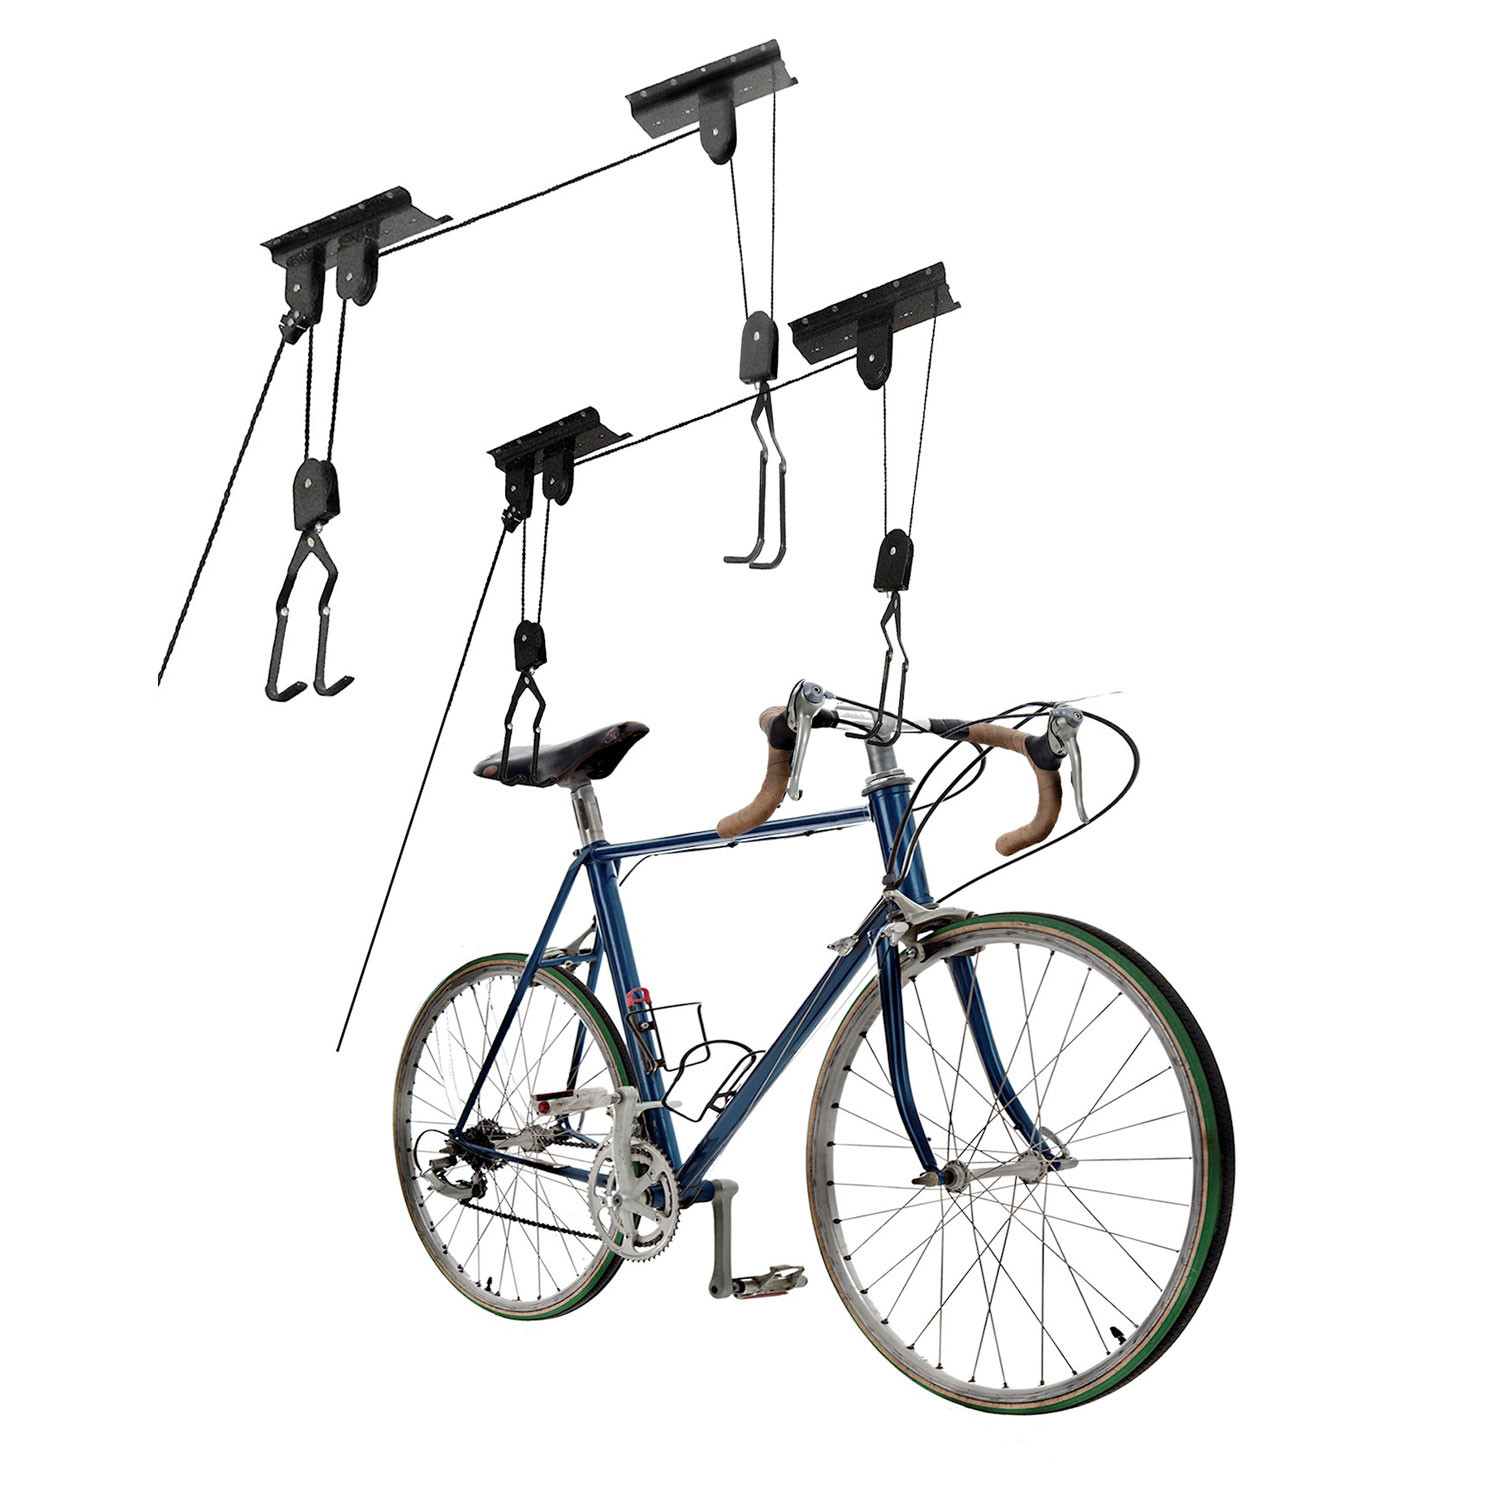 Details About Great Working Tools Bike Hoists Set Of 2 Hanging Ceiling Mount Ladder Lifts